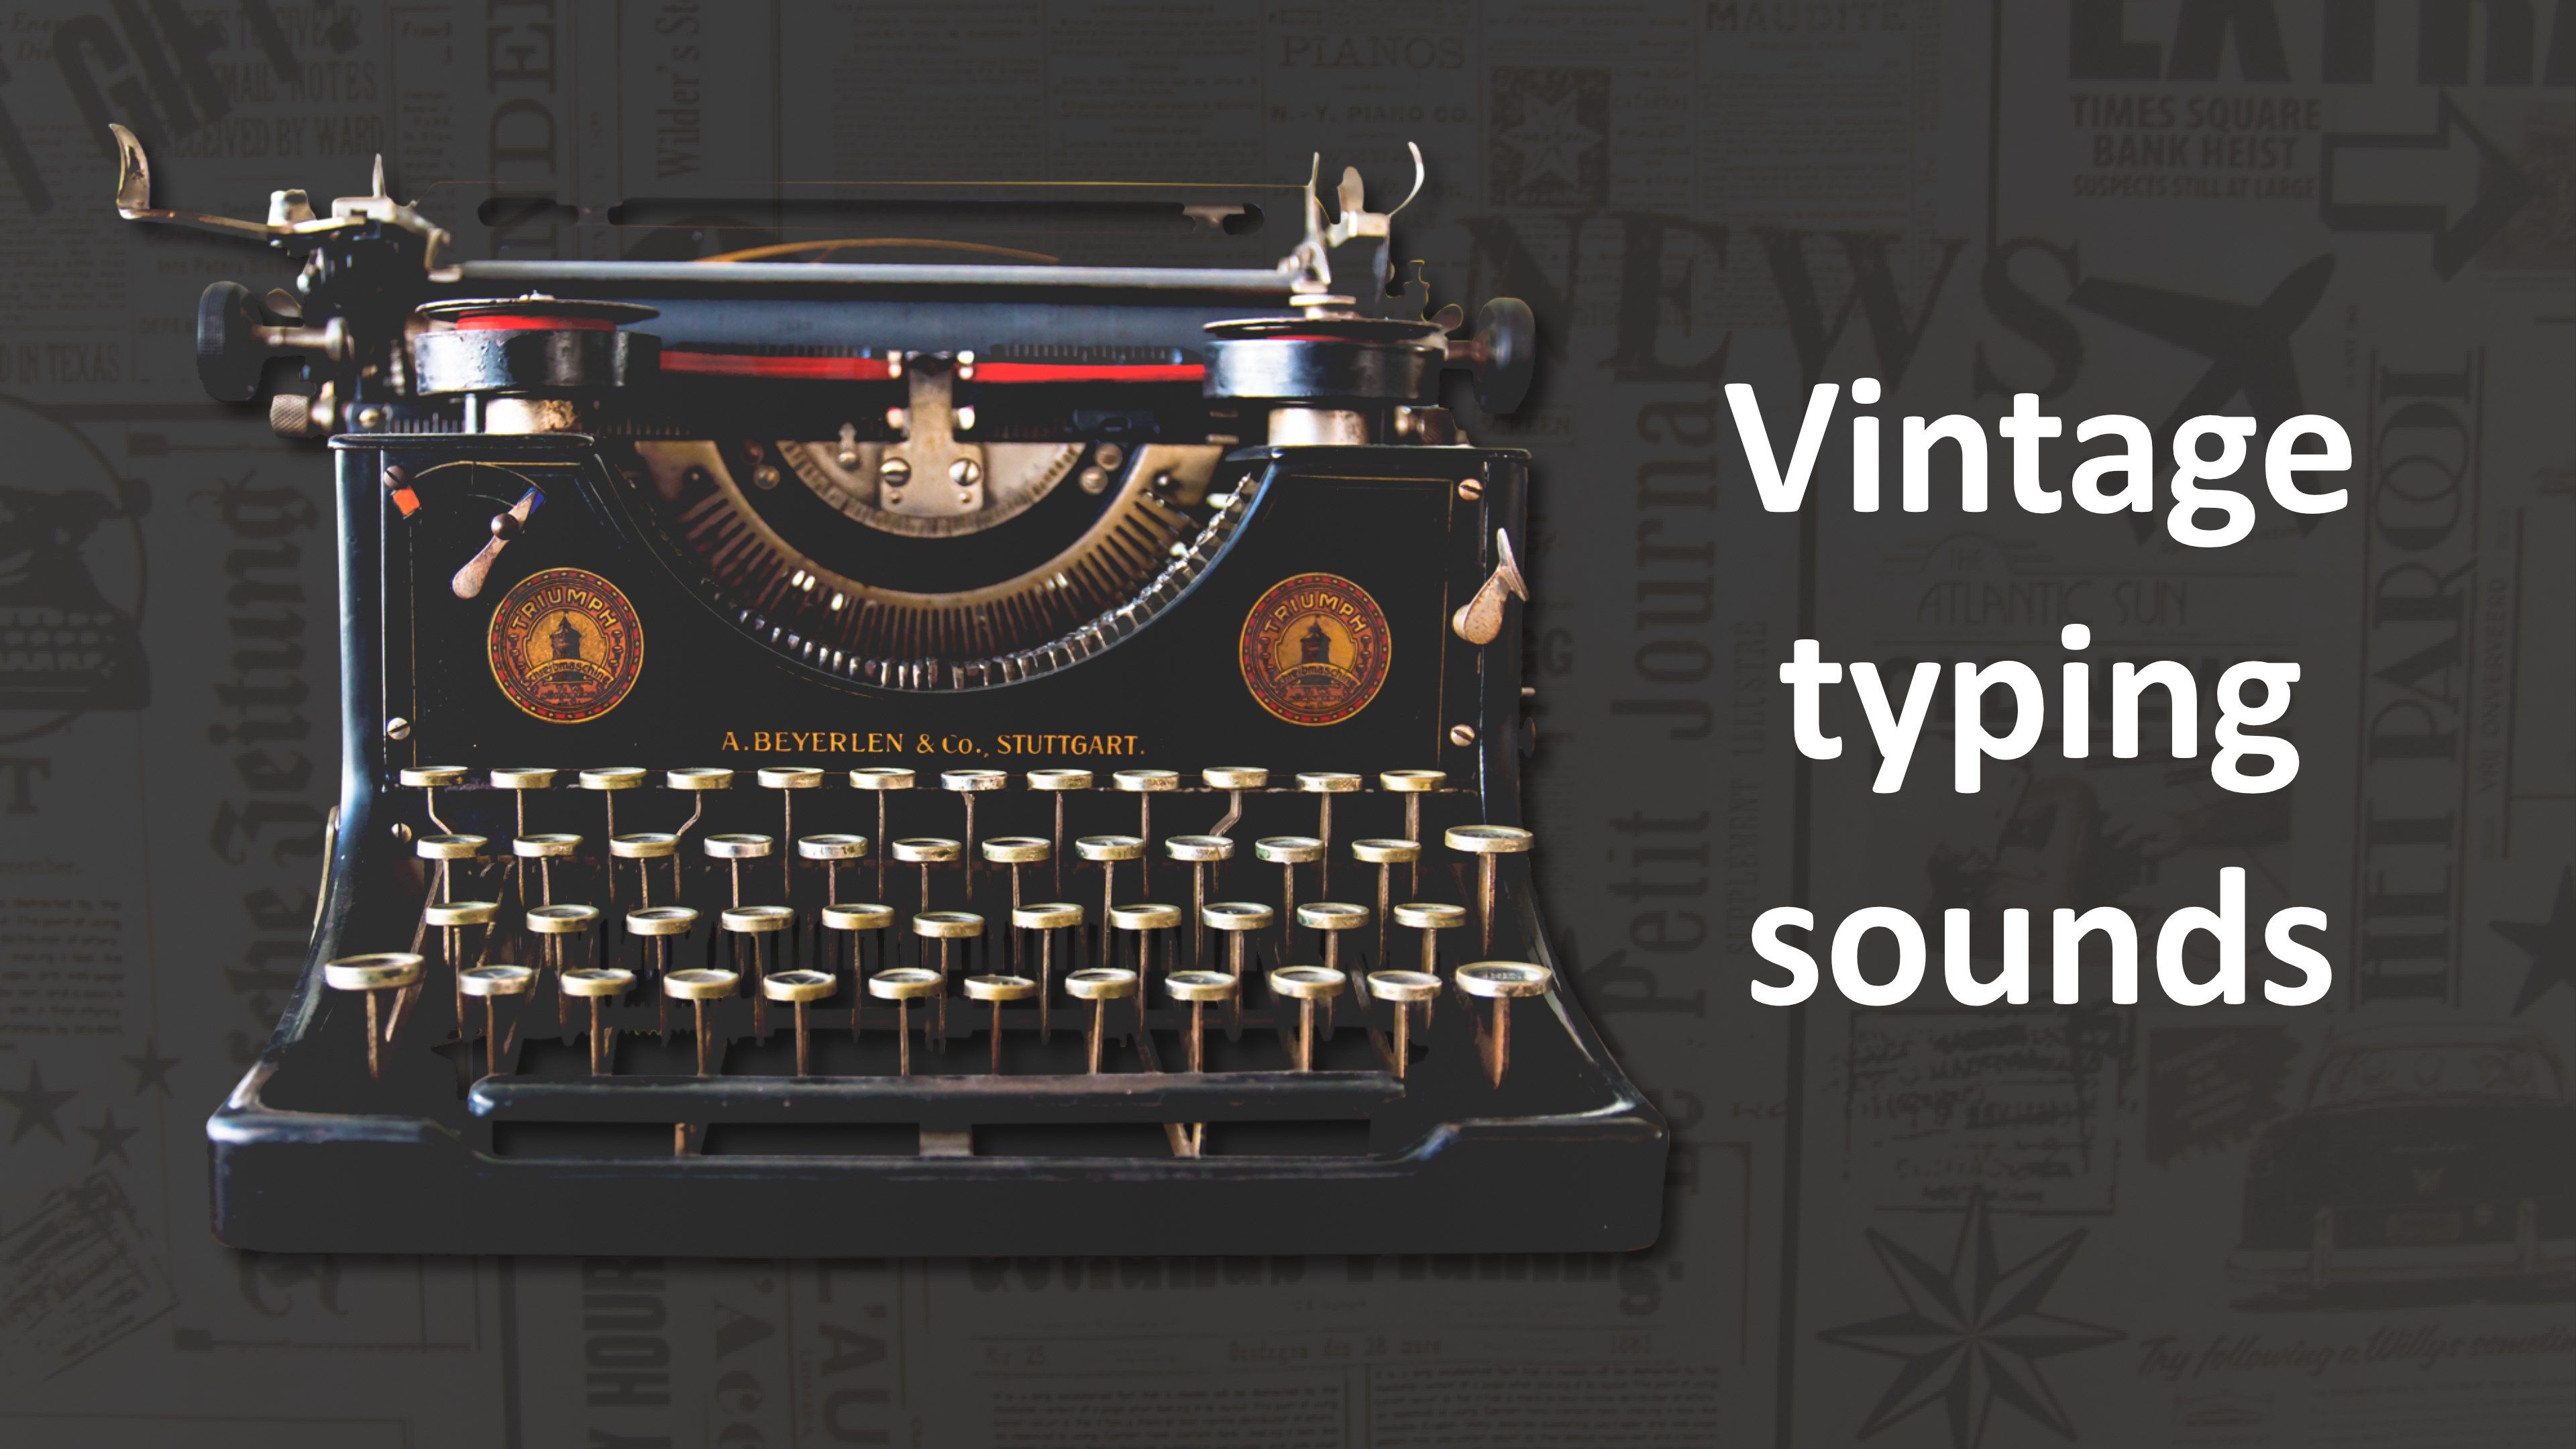 Vintage keyboard typing sounds from your laptop keyboard. Sound effects to make it sound like you are typing on a vintage 1960's typerwriter!